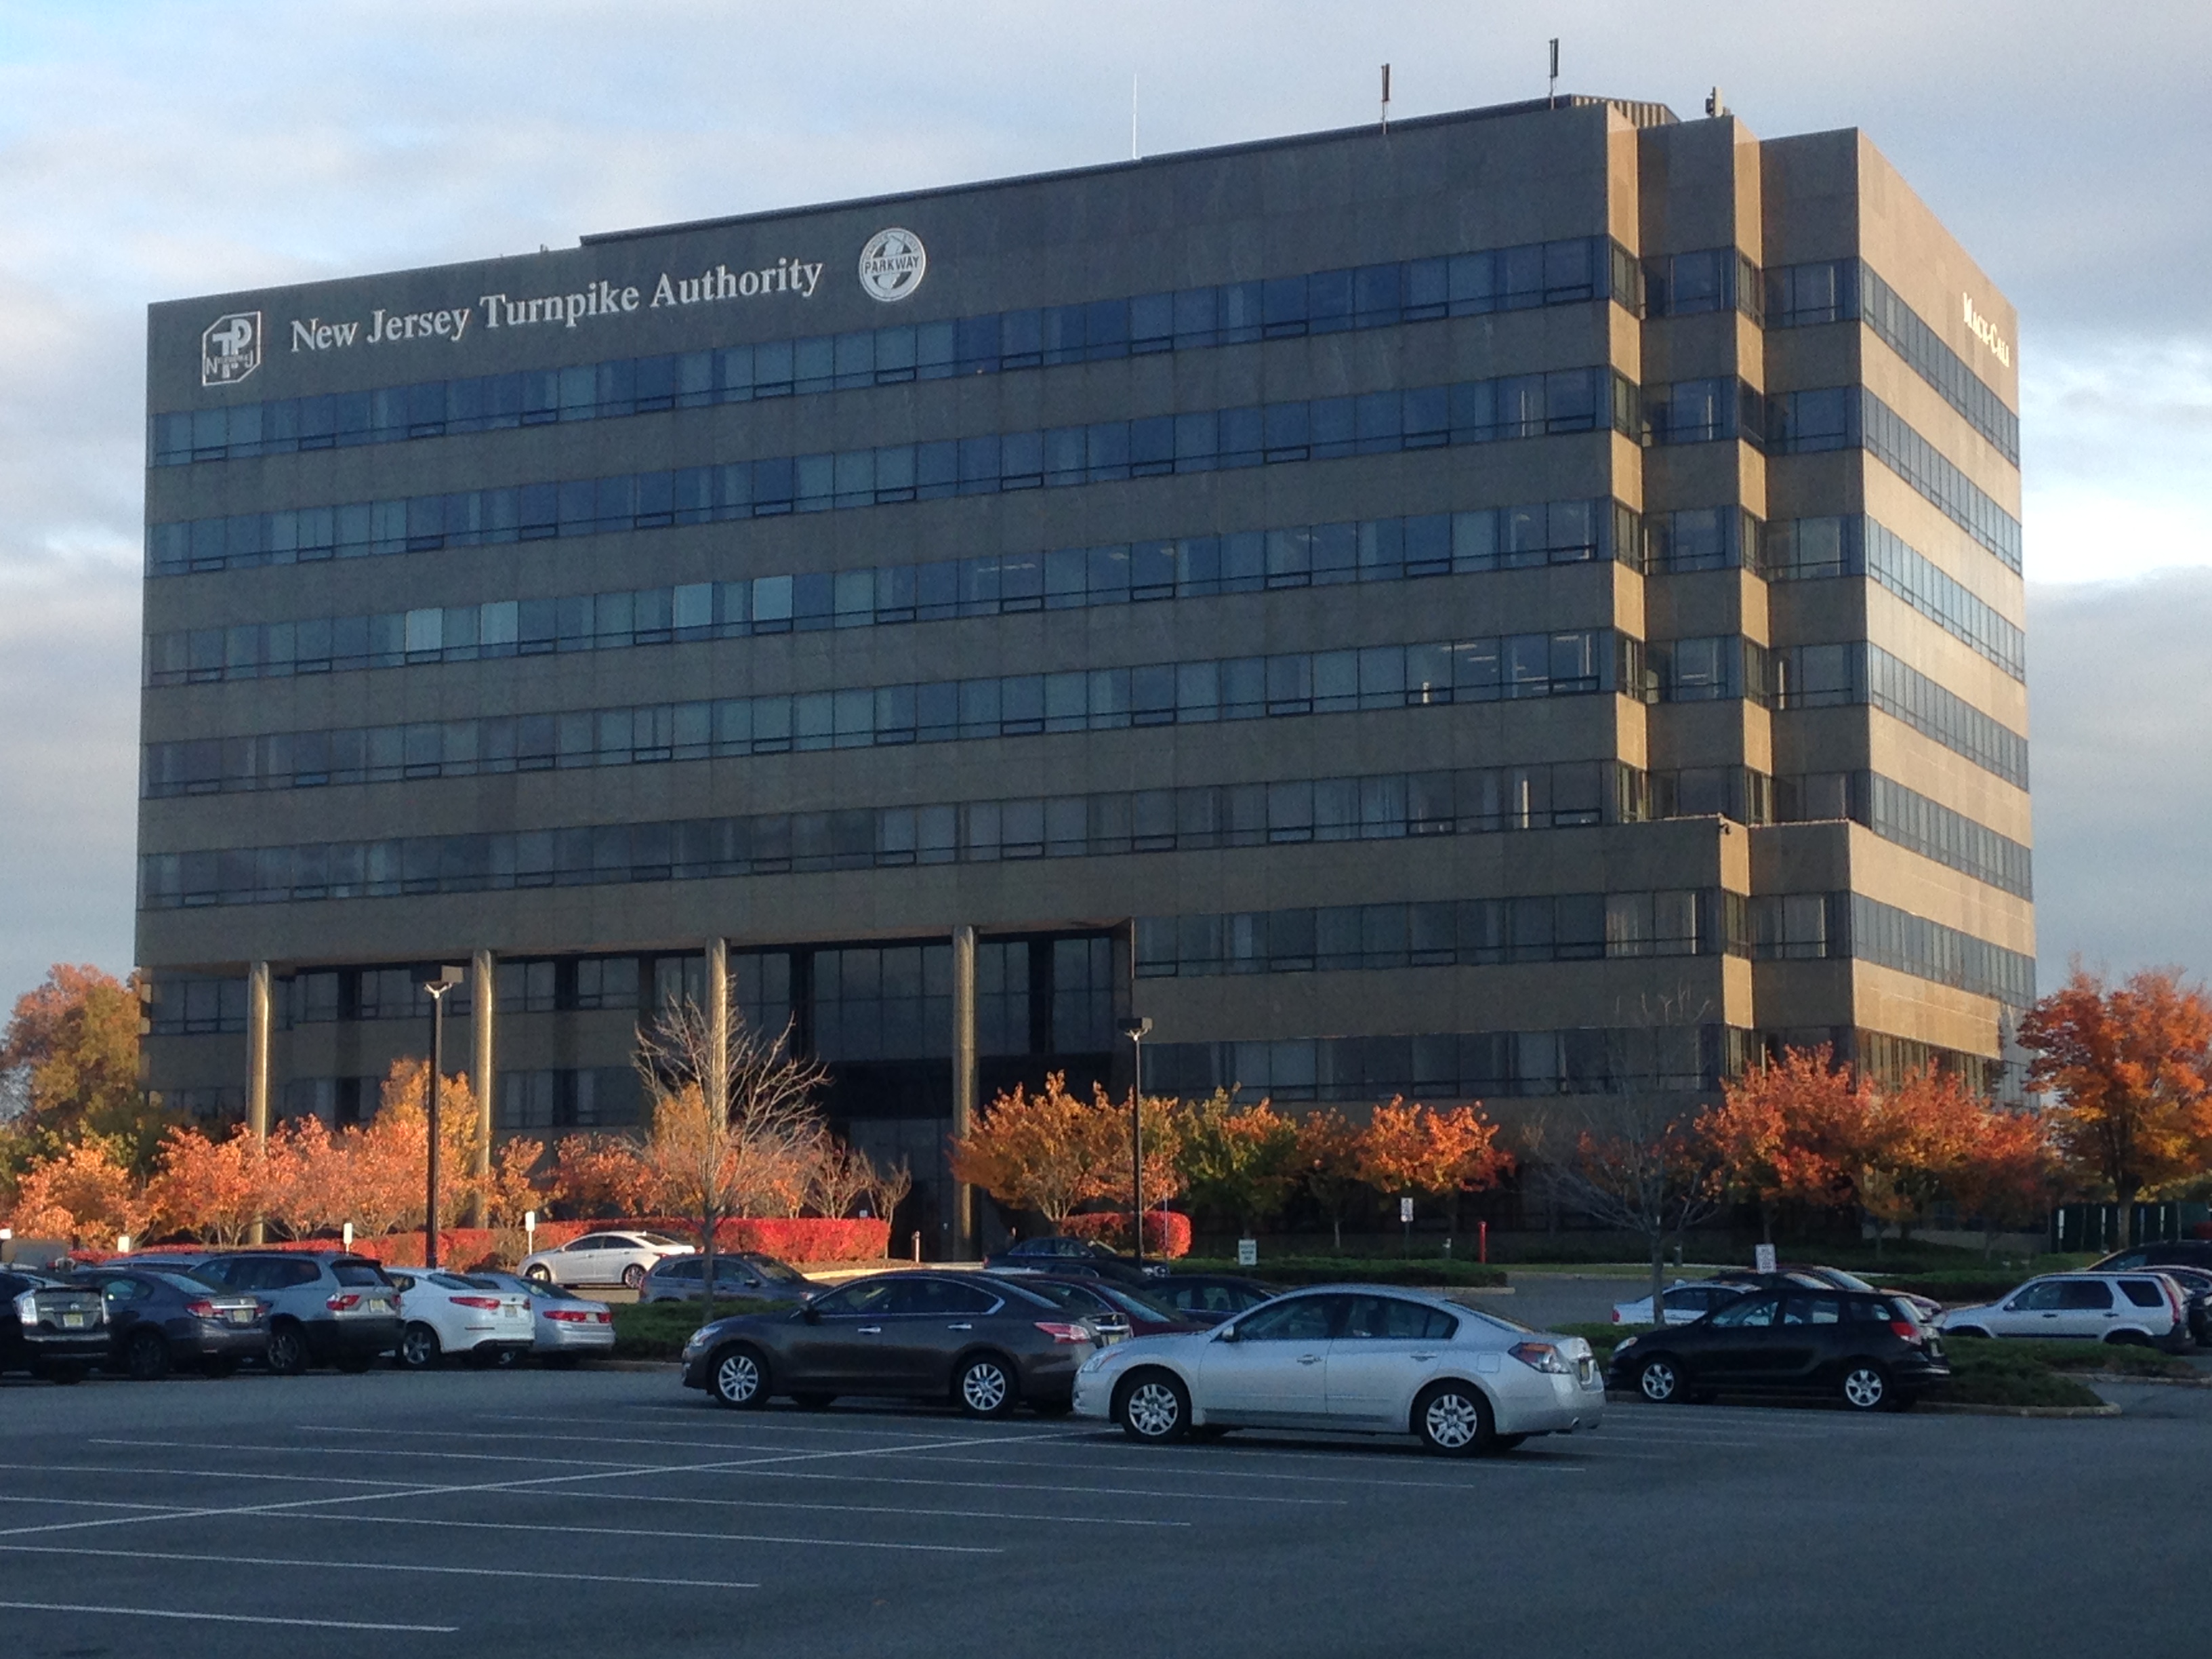 New Jersey Turnpike Authority Headquarters